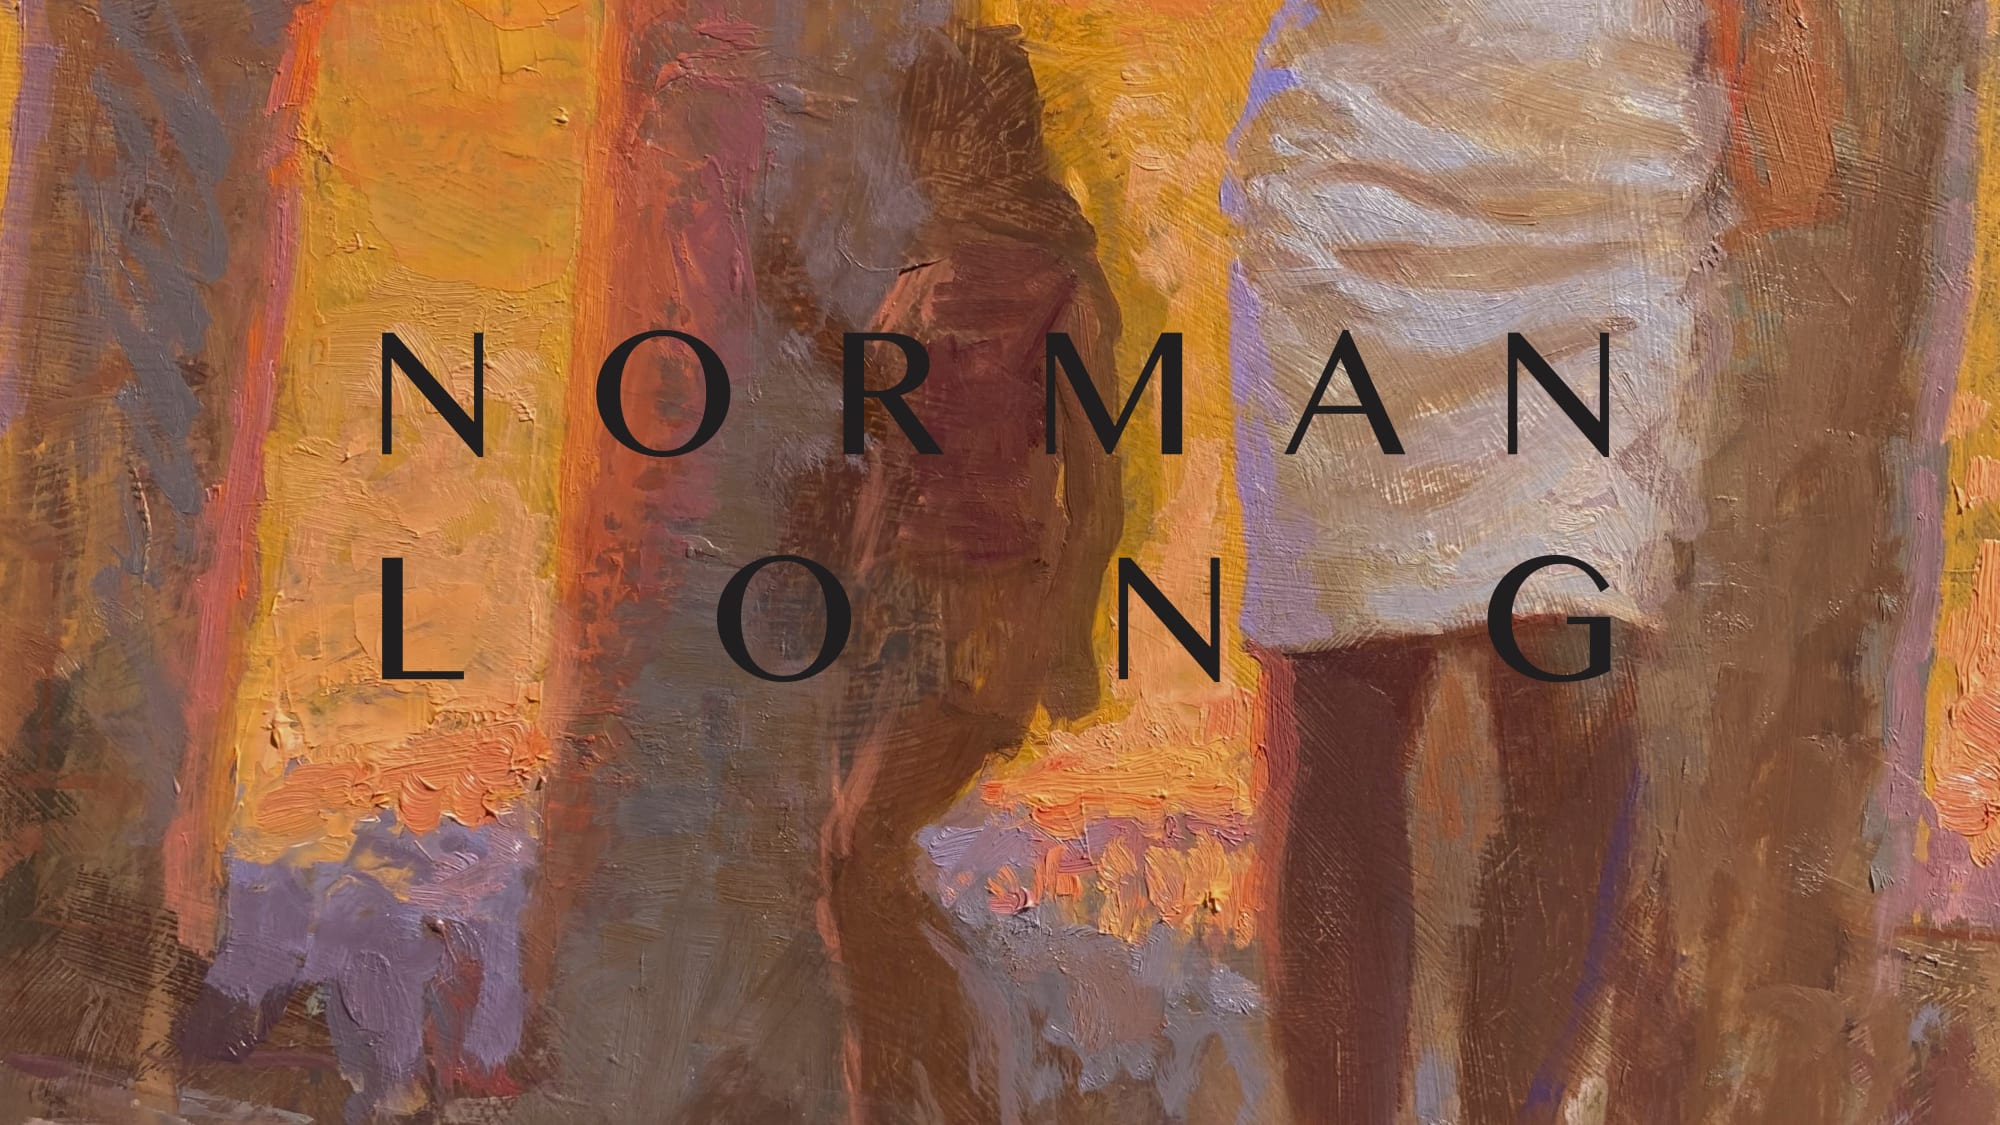 Emerging from the Light: Norman Long